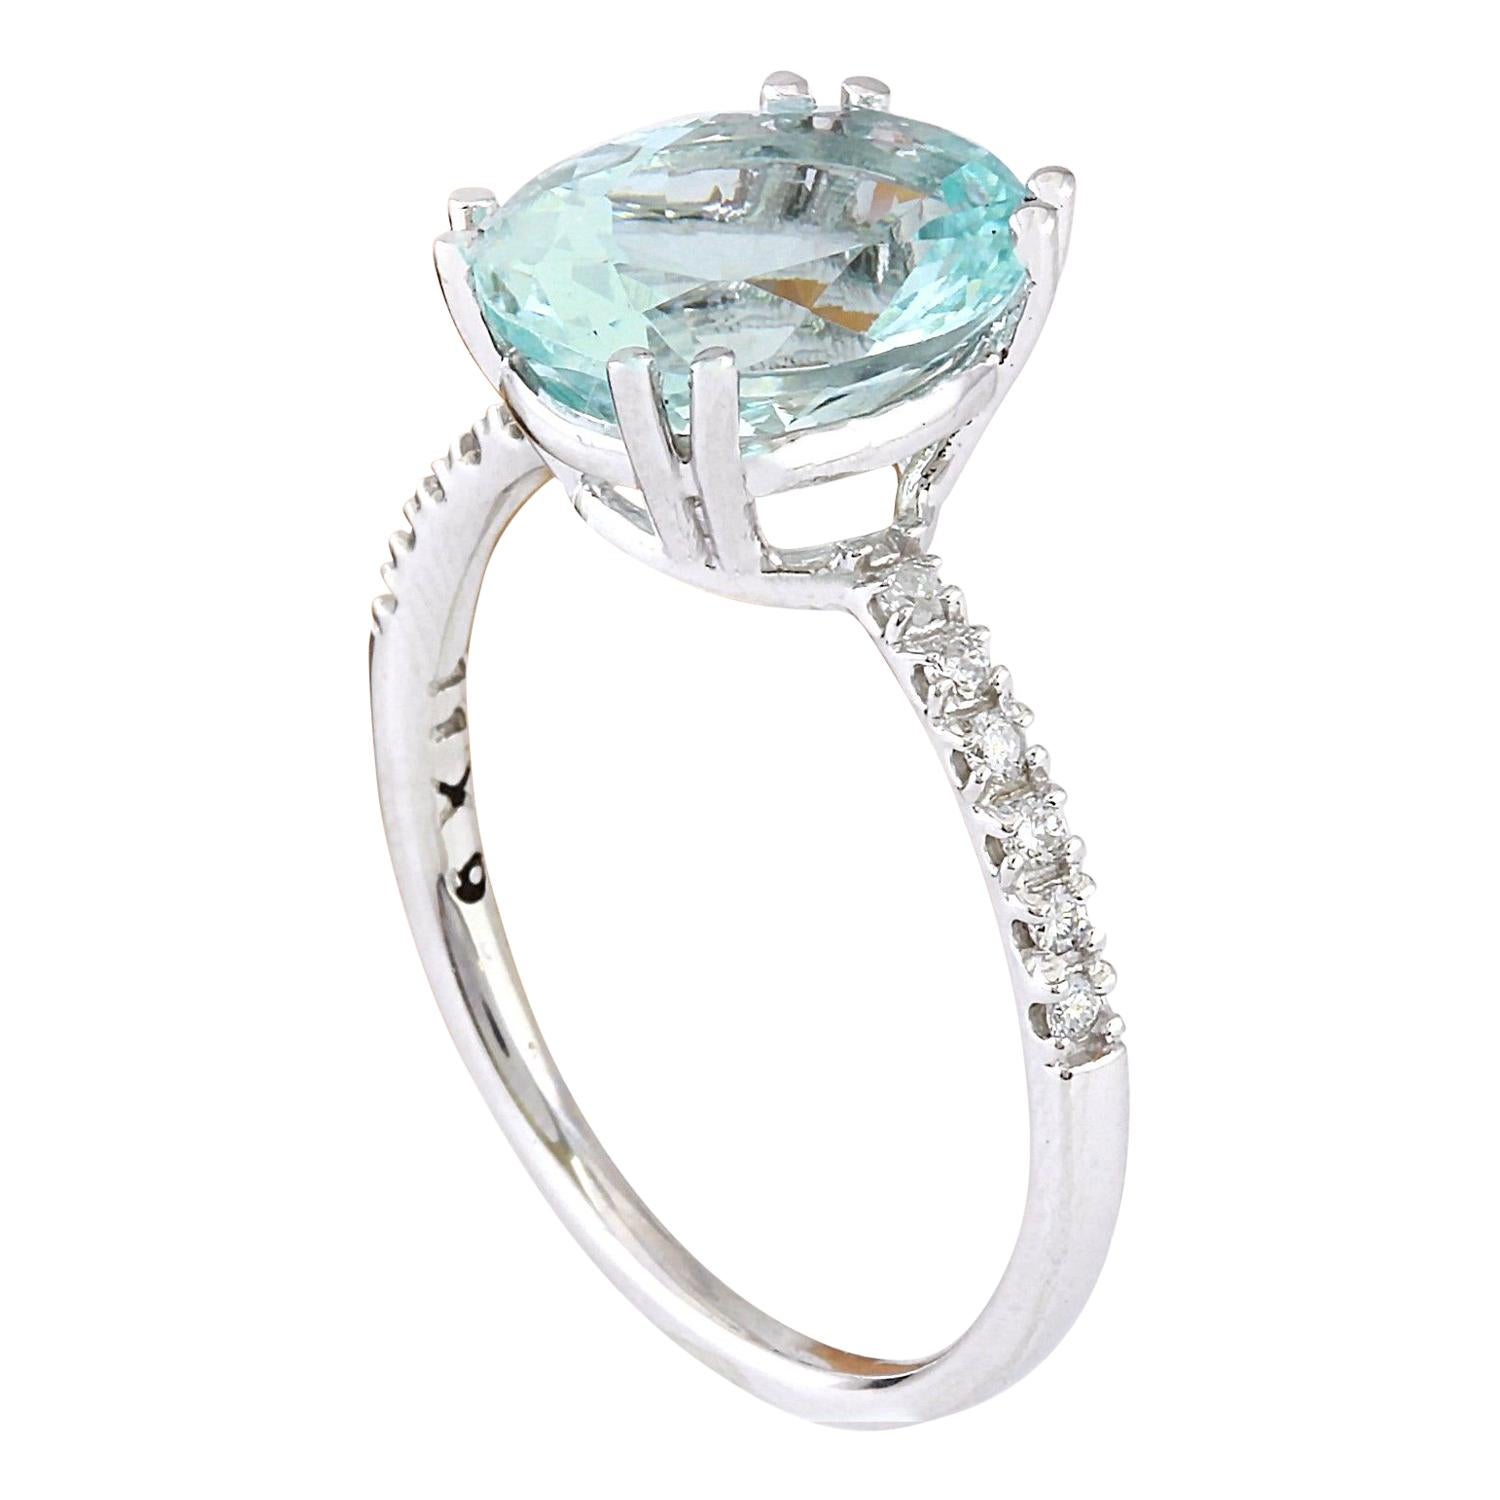 4.32 Carat Natural Aquamarine 14 Karat Solid White Gold Diamond Ring In New Condition For Sale In Los Angeles, CA